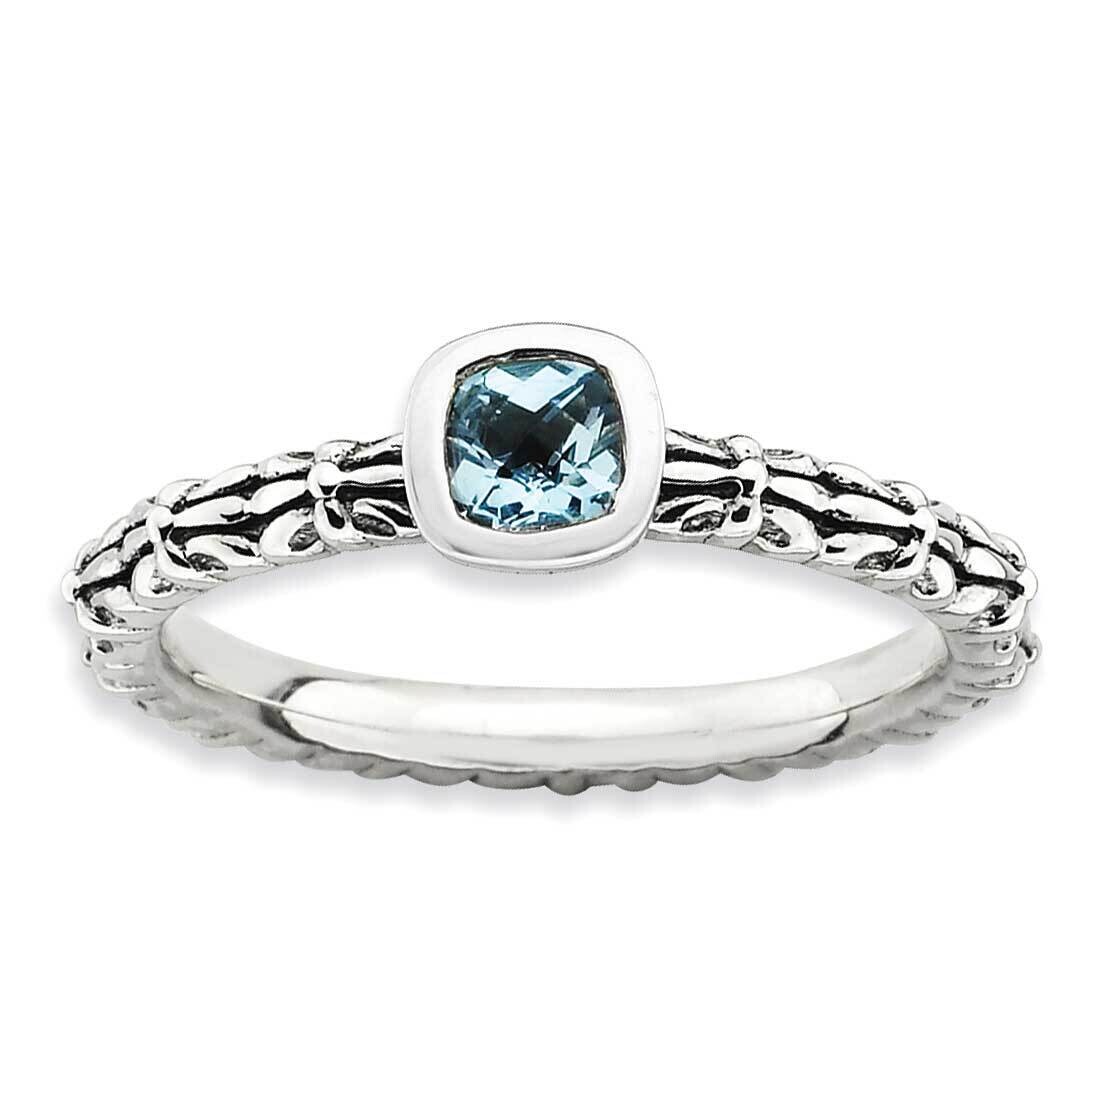 Stackable Expressions Checker-Cut Blue Topaz Antiqued Ring Sterling Silver QSK850-NOAU